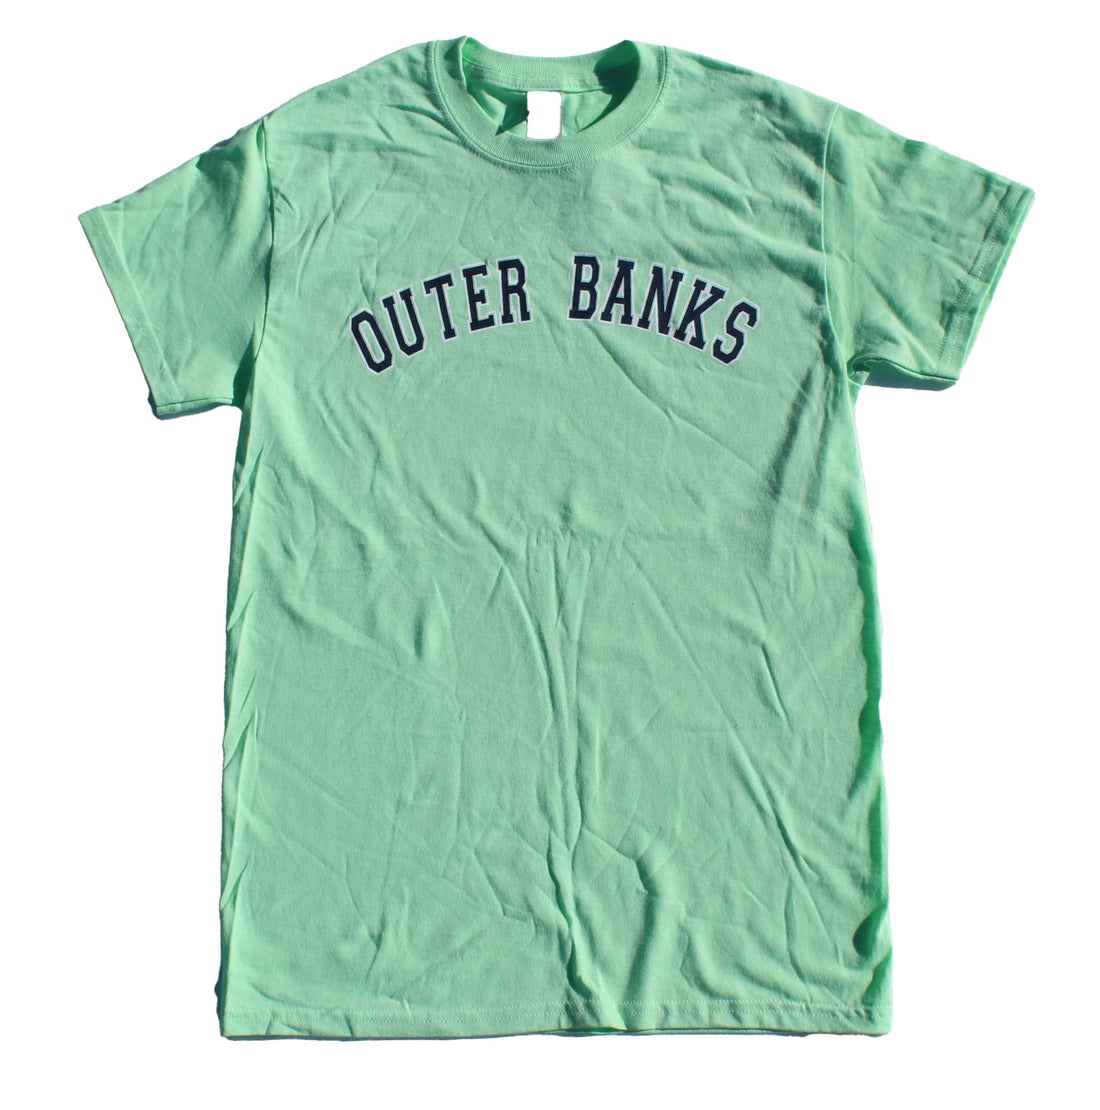 Outer Banks Classic Tee